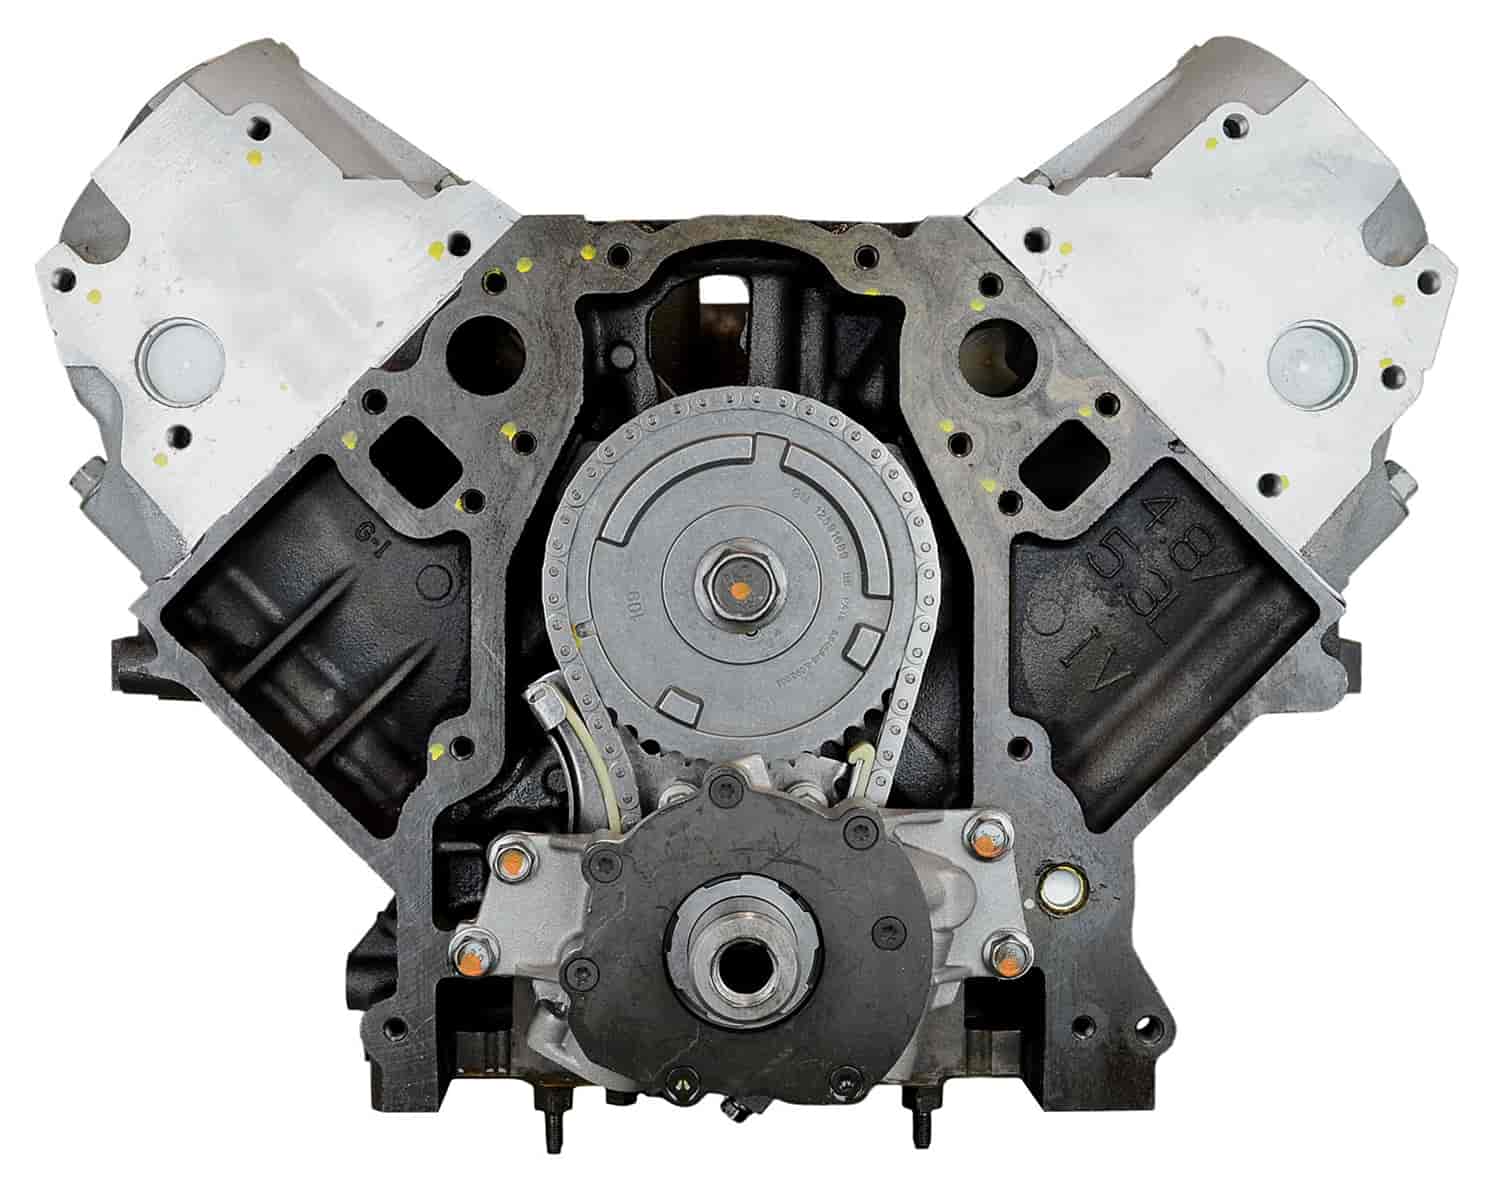 Remanufactured Crate Engine for 2008-2009 Chevy/GMC Van with 5.3L V8